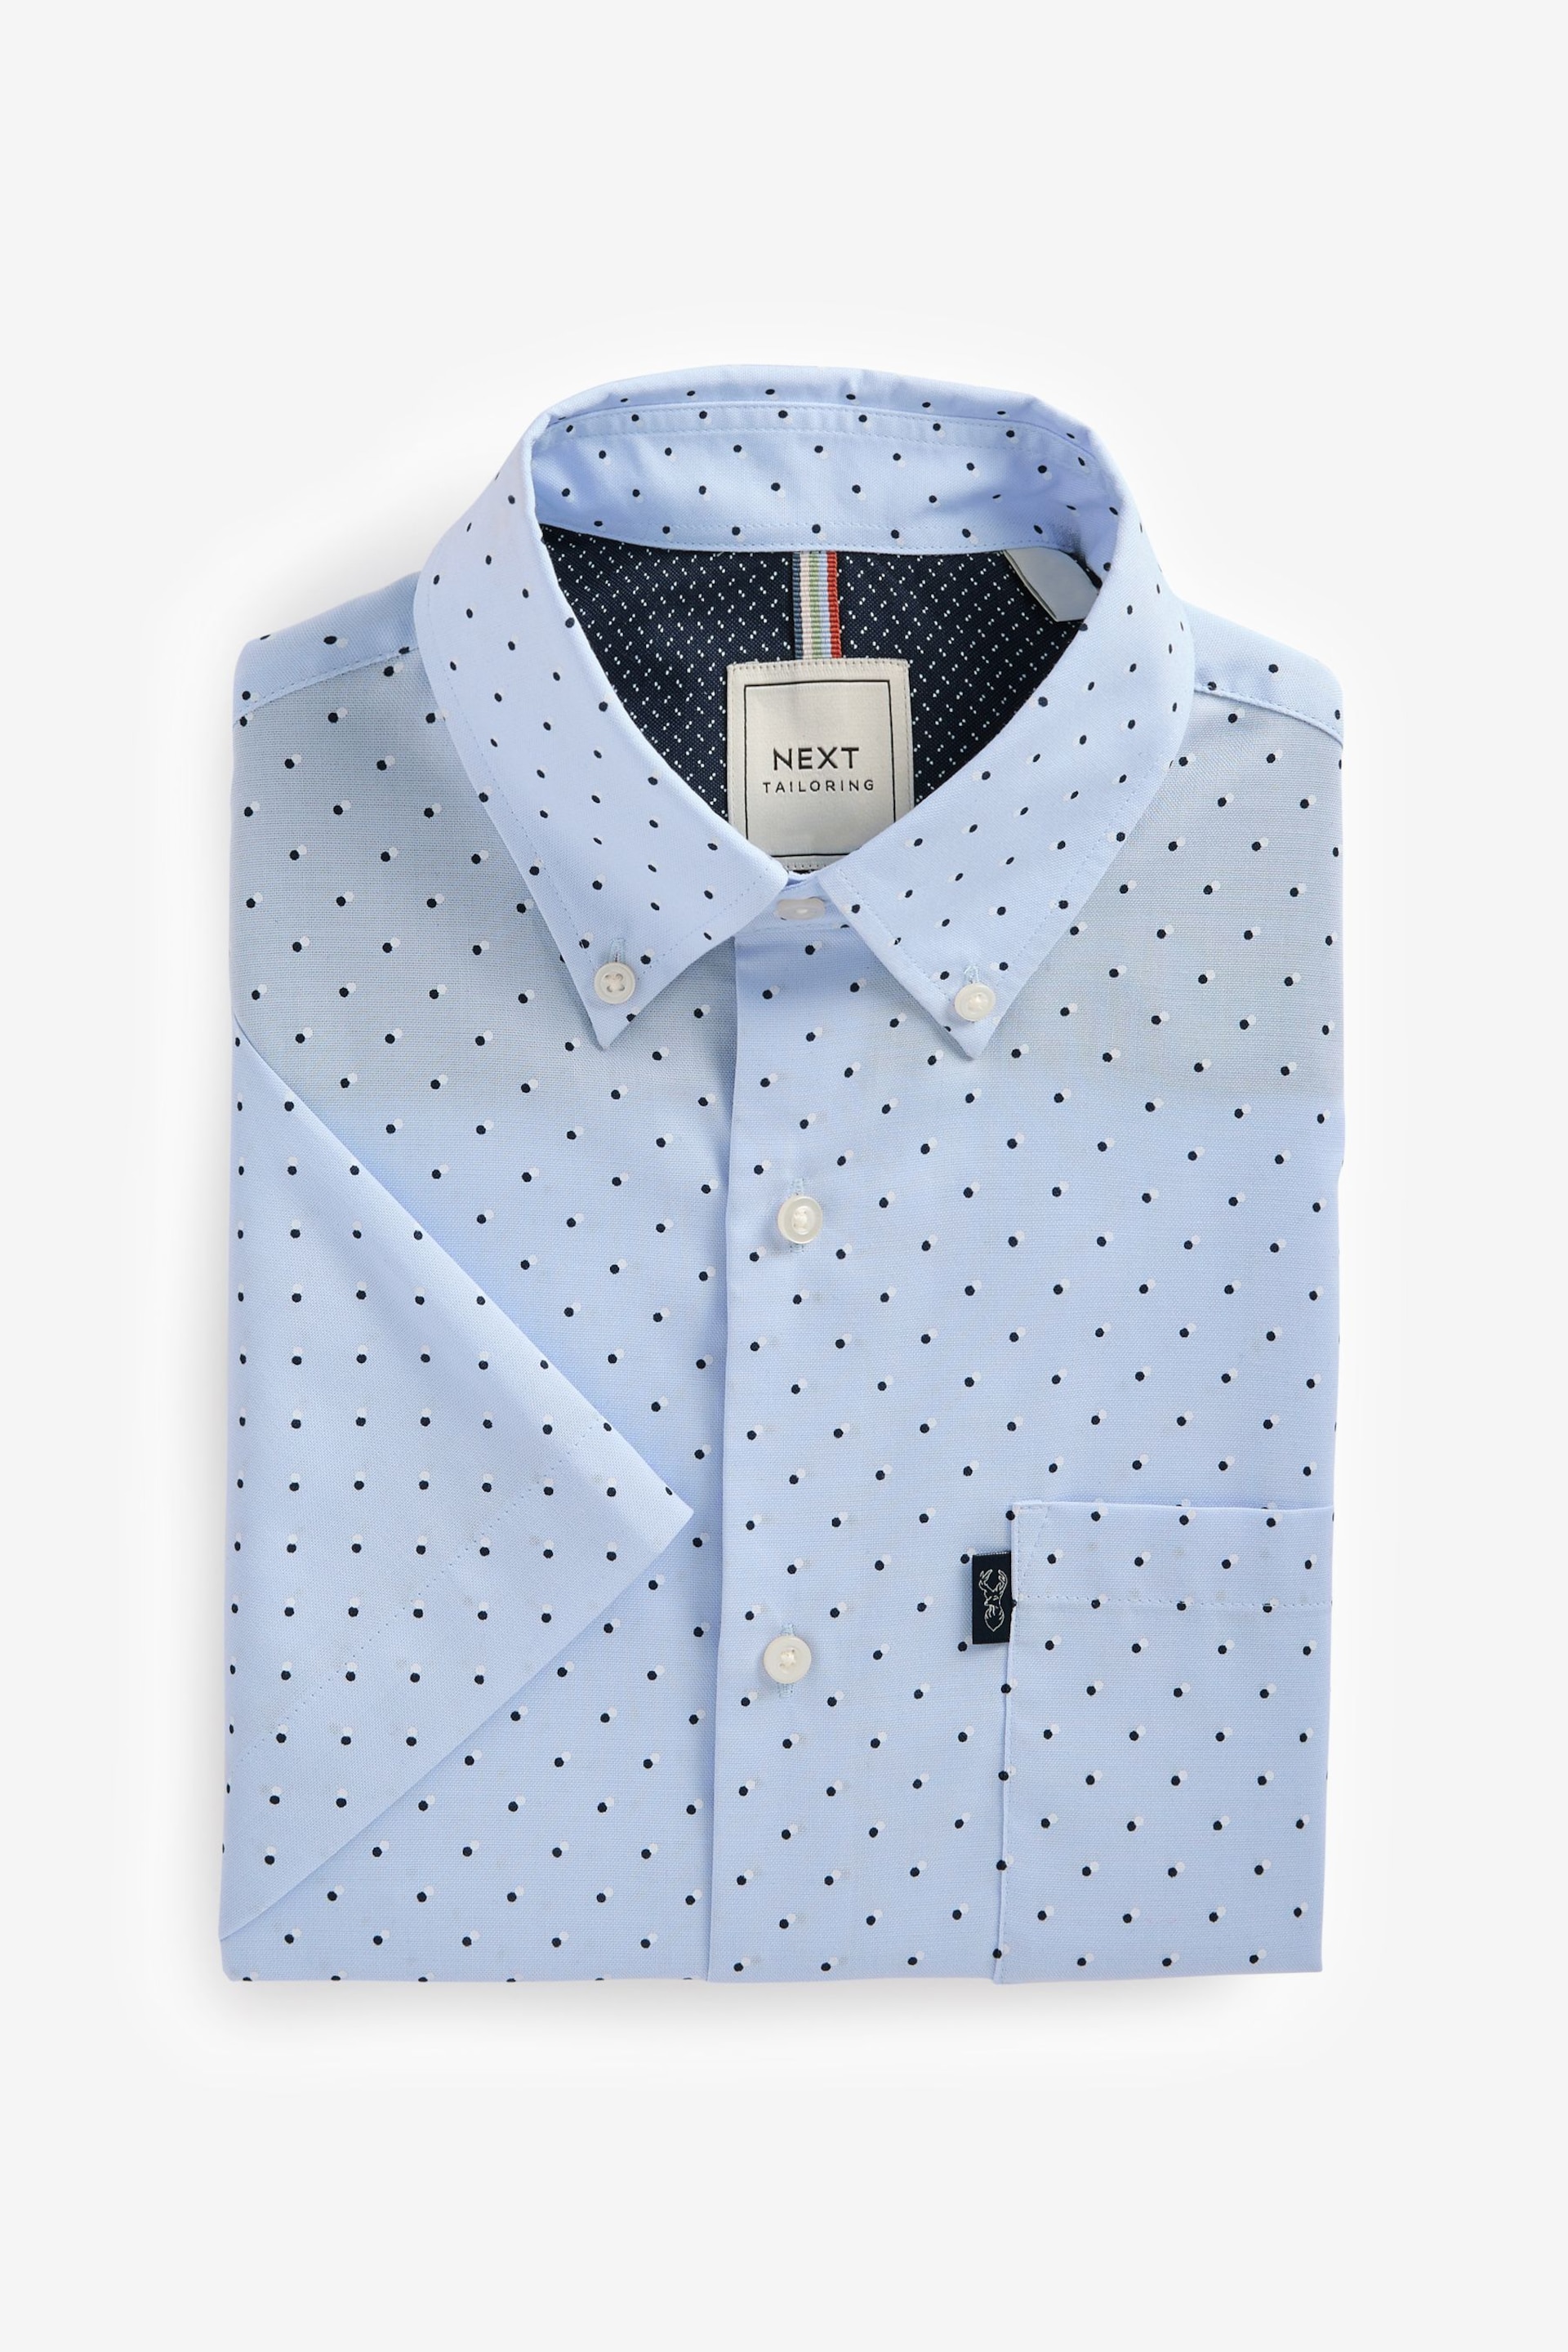 Light Blue Easy Iron Button Down Short Sleeve Oxford Shirt - Image 6 of 8